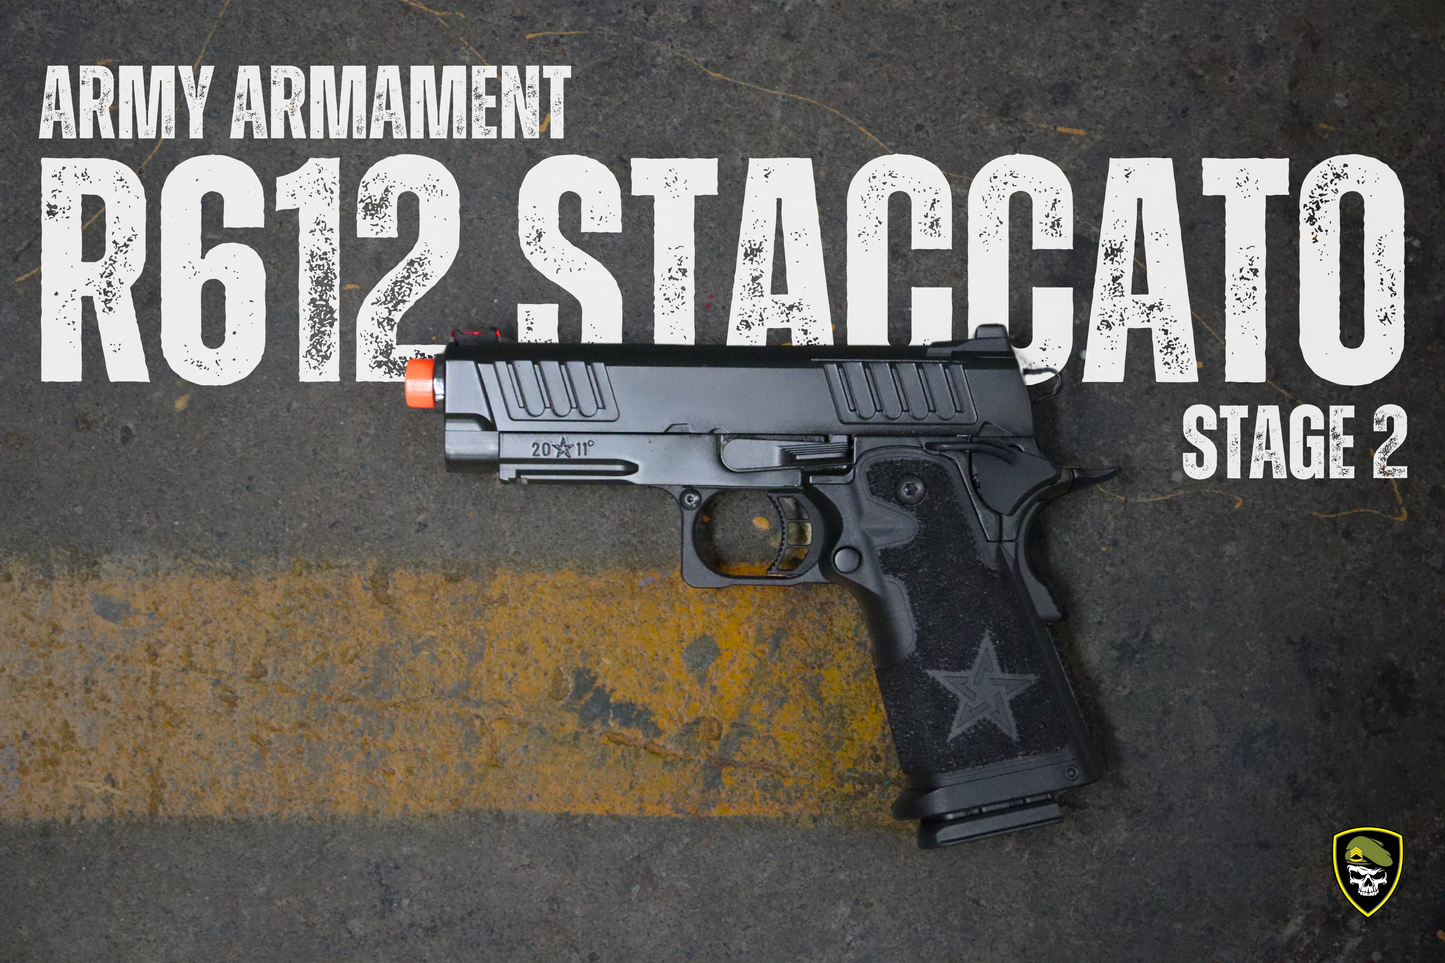 
                  
                    Army Armament Stage 2 R612 Staccato C2 2011 Style Star Stippling Grip Hi-Capa GBB Gel Blaster
                  
                